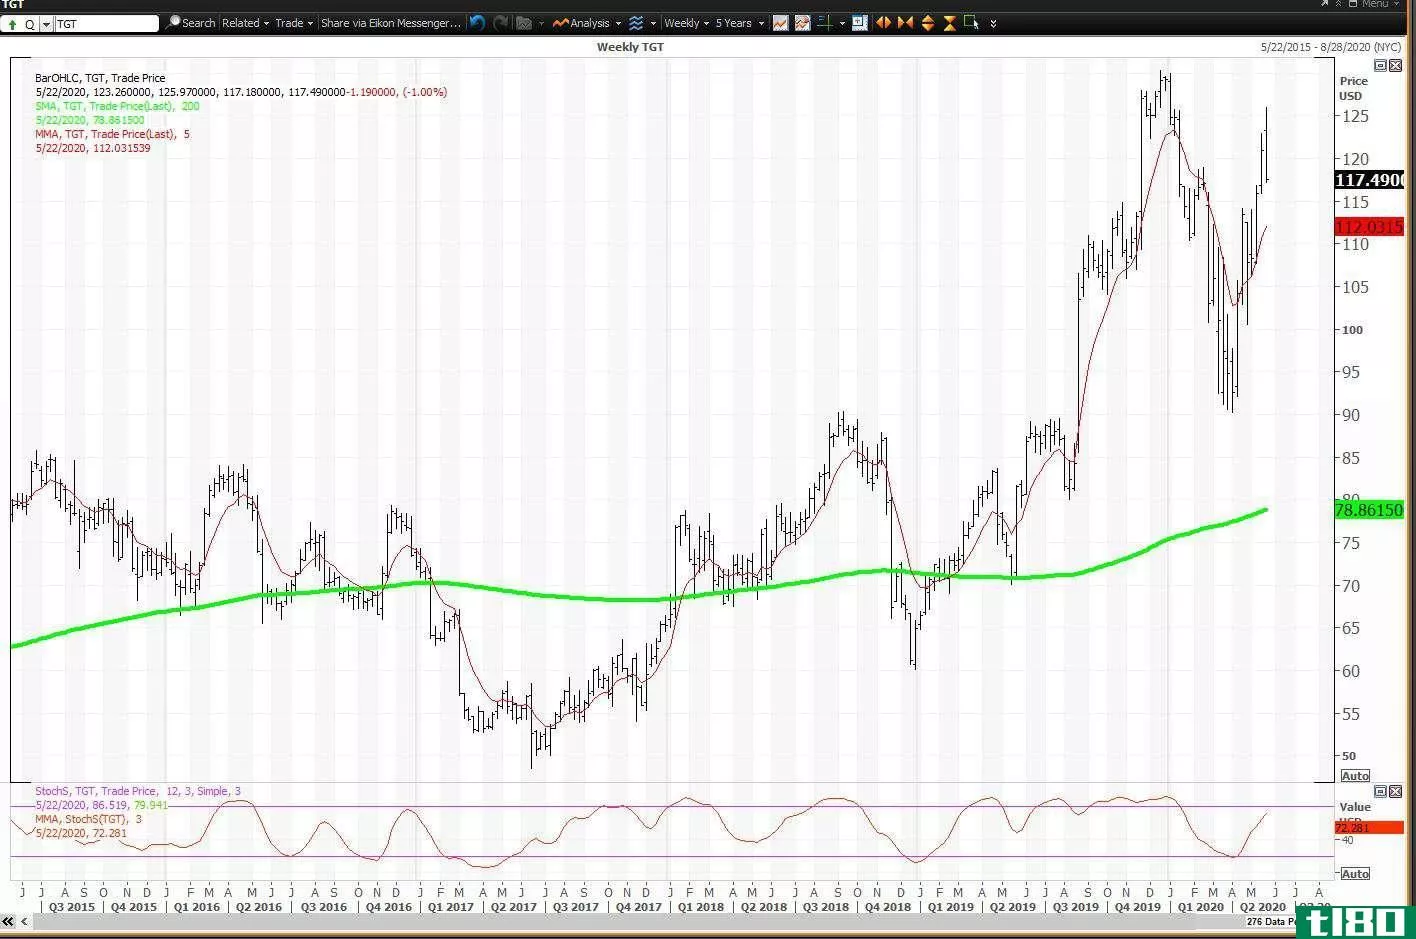 Weekly chart showing the share price performance of Target Corporation (TGT)